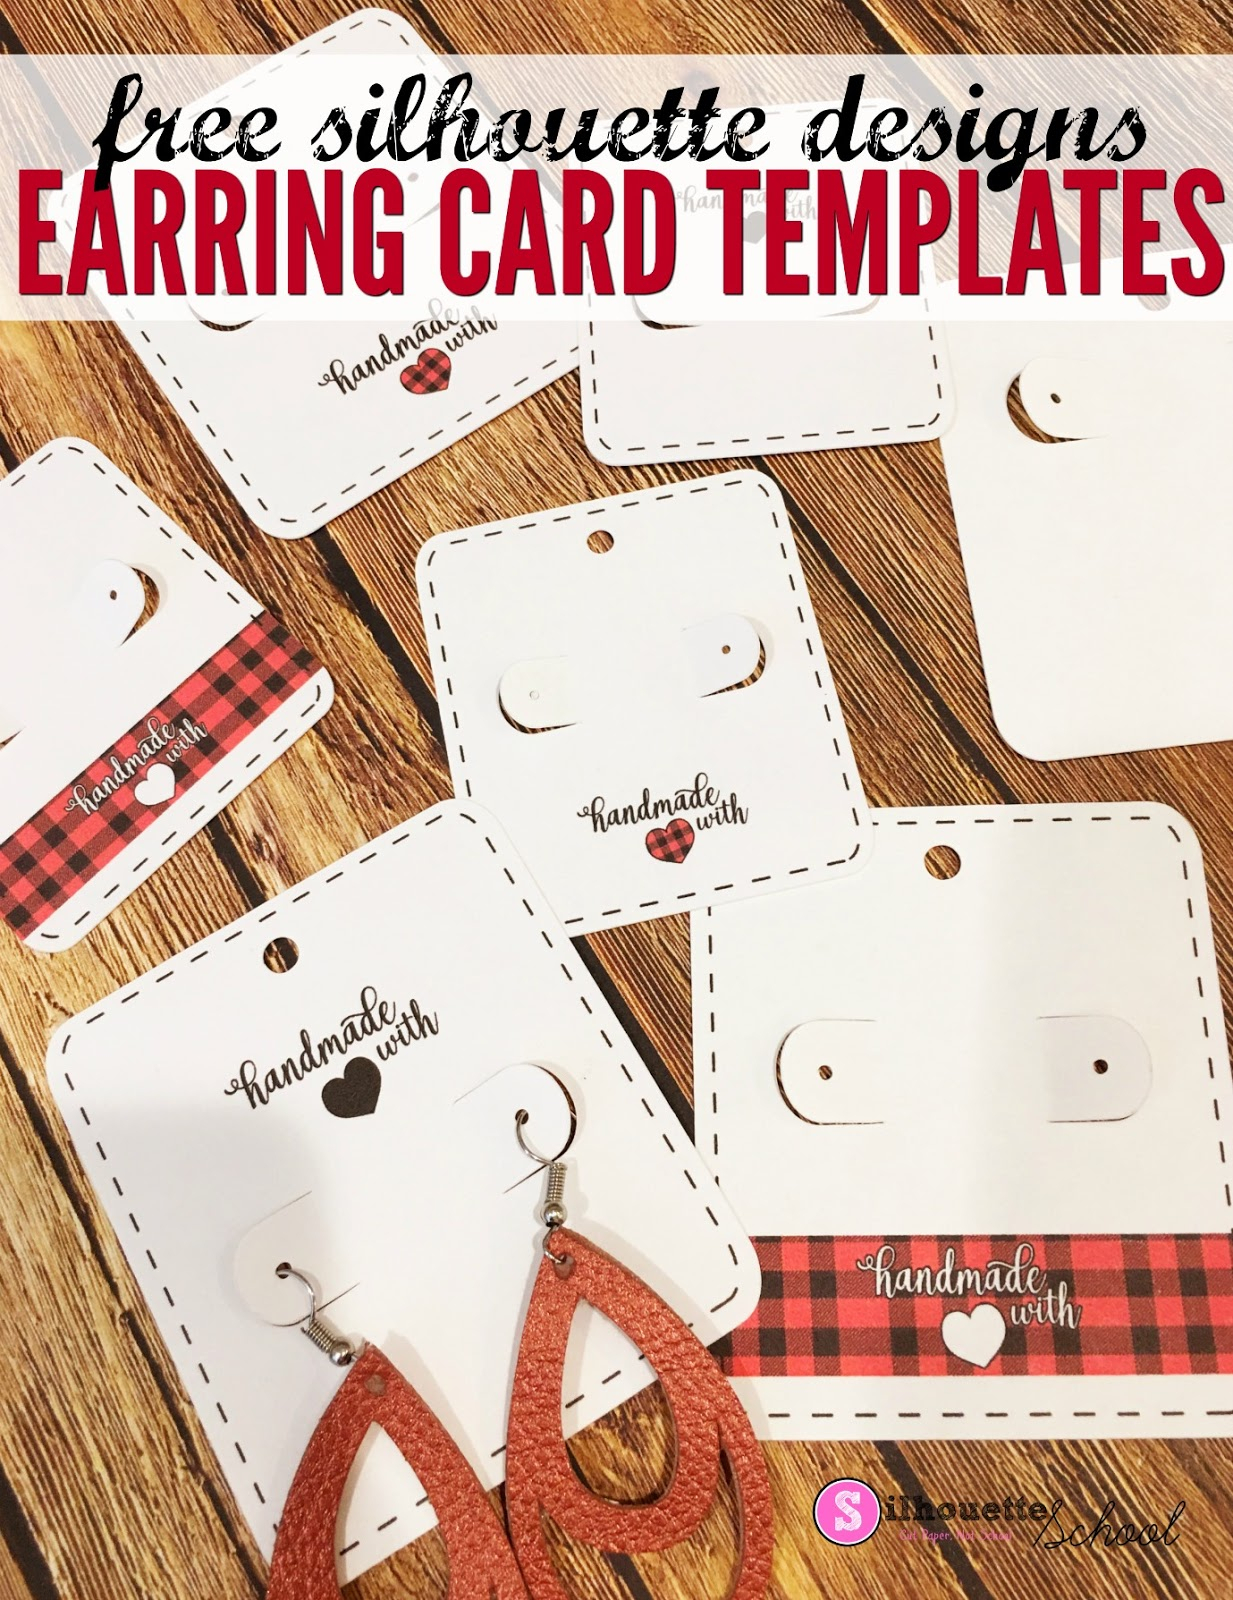 Free Silhouette Earring Card Templates (Set Of 8 With Regard To Free Svg Card Templates